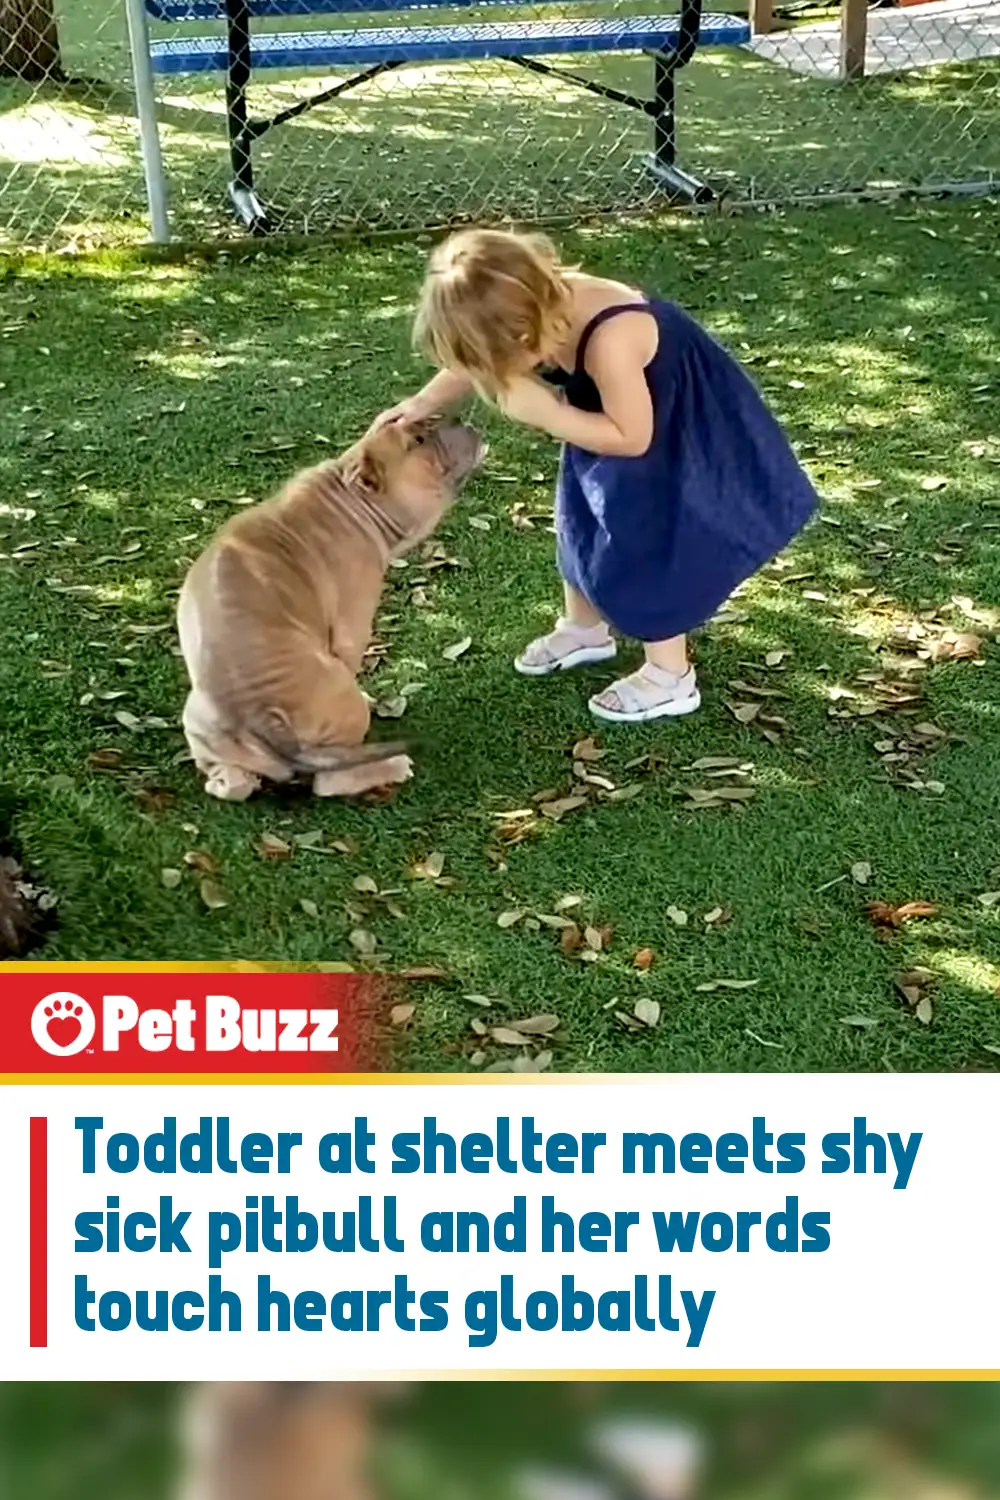 Toddler at shelter meets shy sick pitbull and her words touch hearts globally